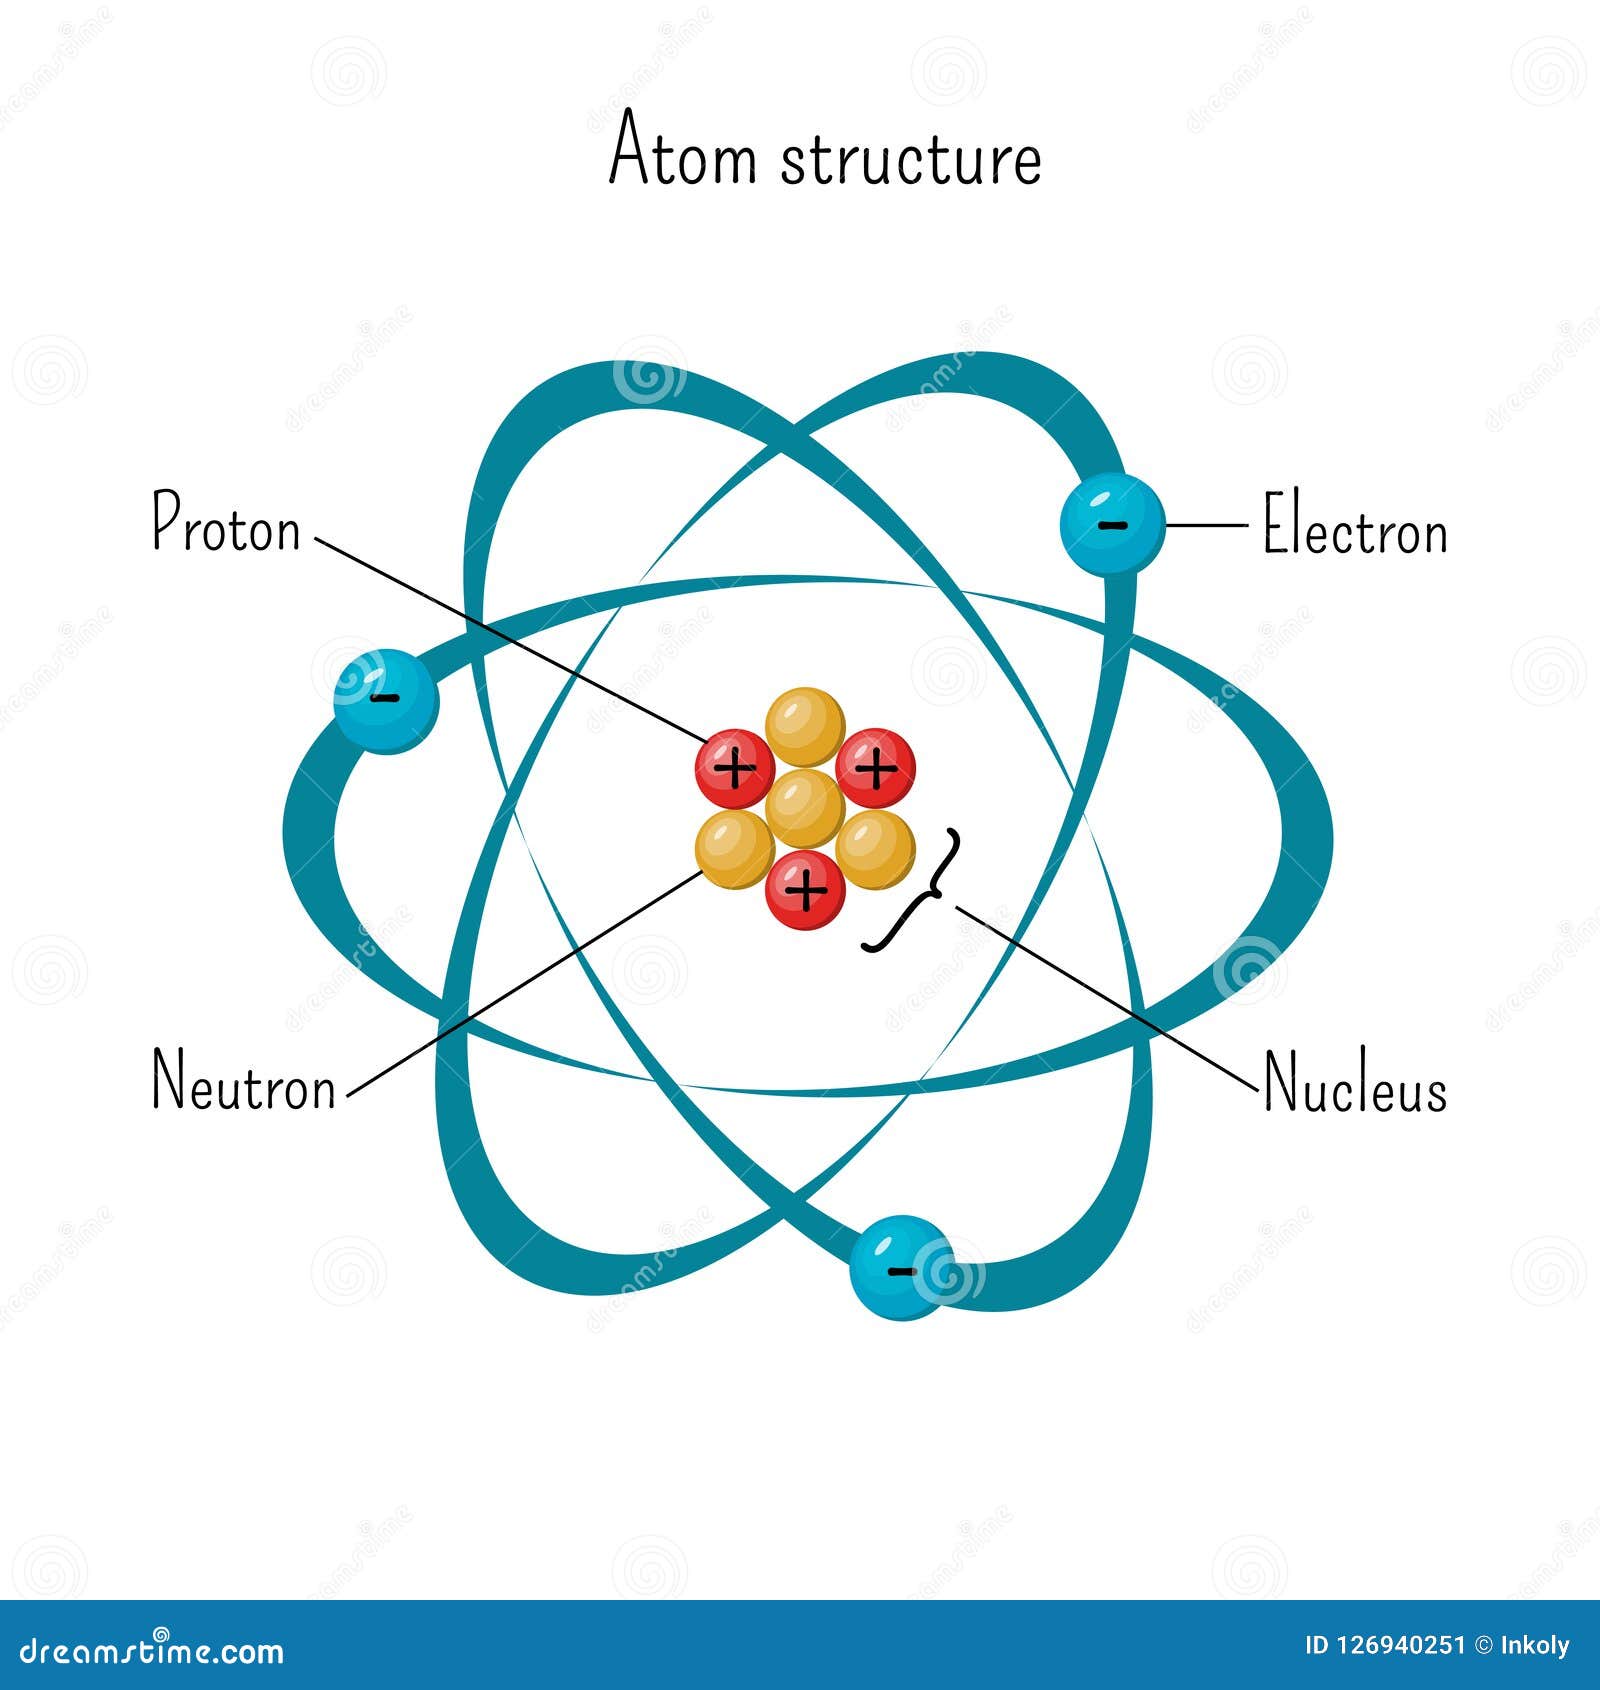 Label The Diagram Of An Atom